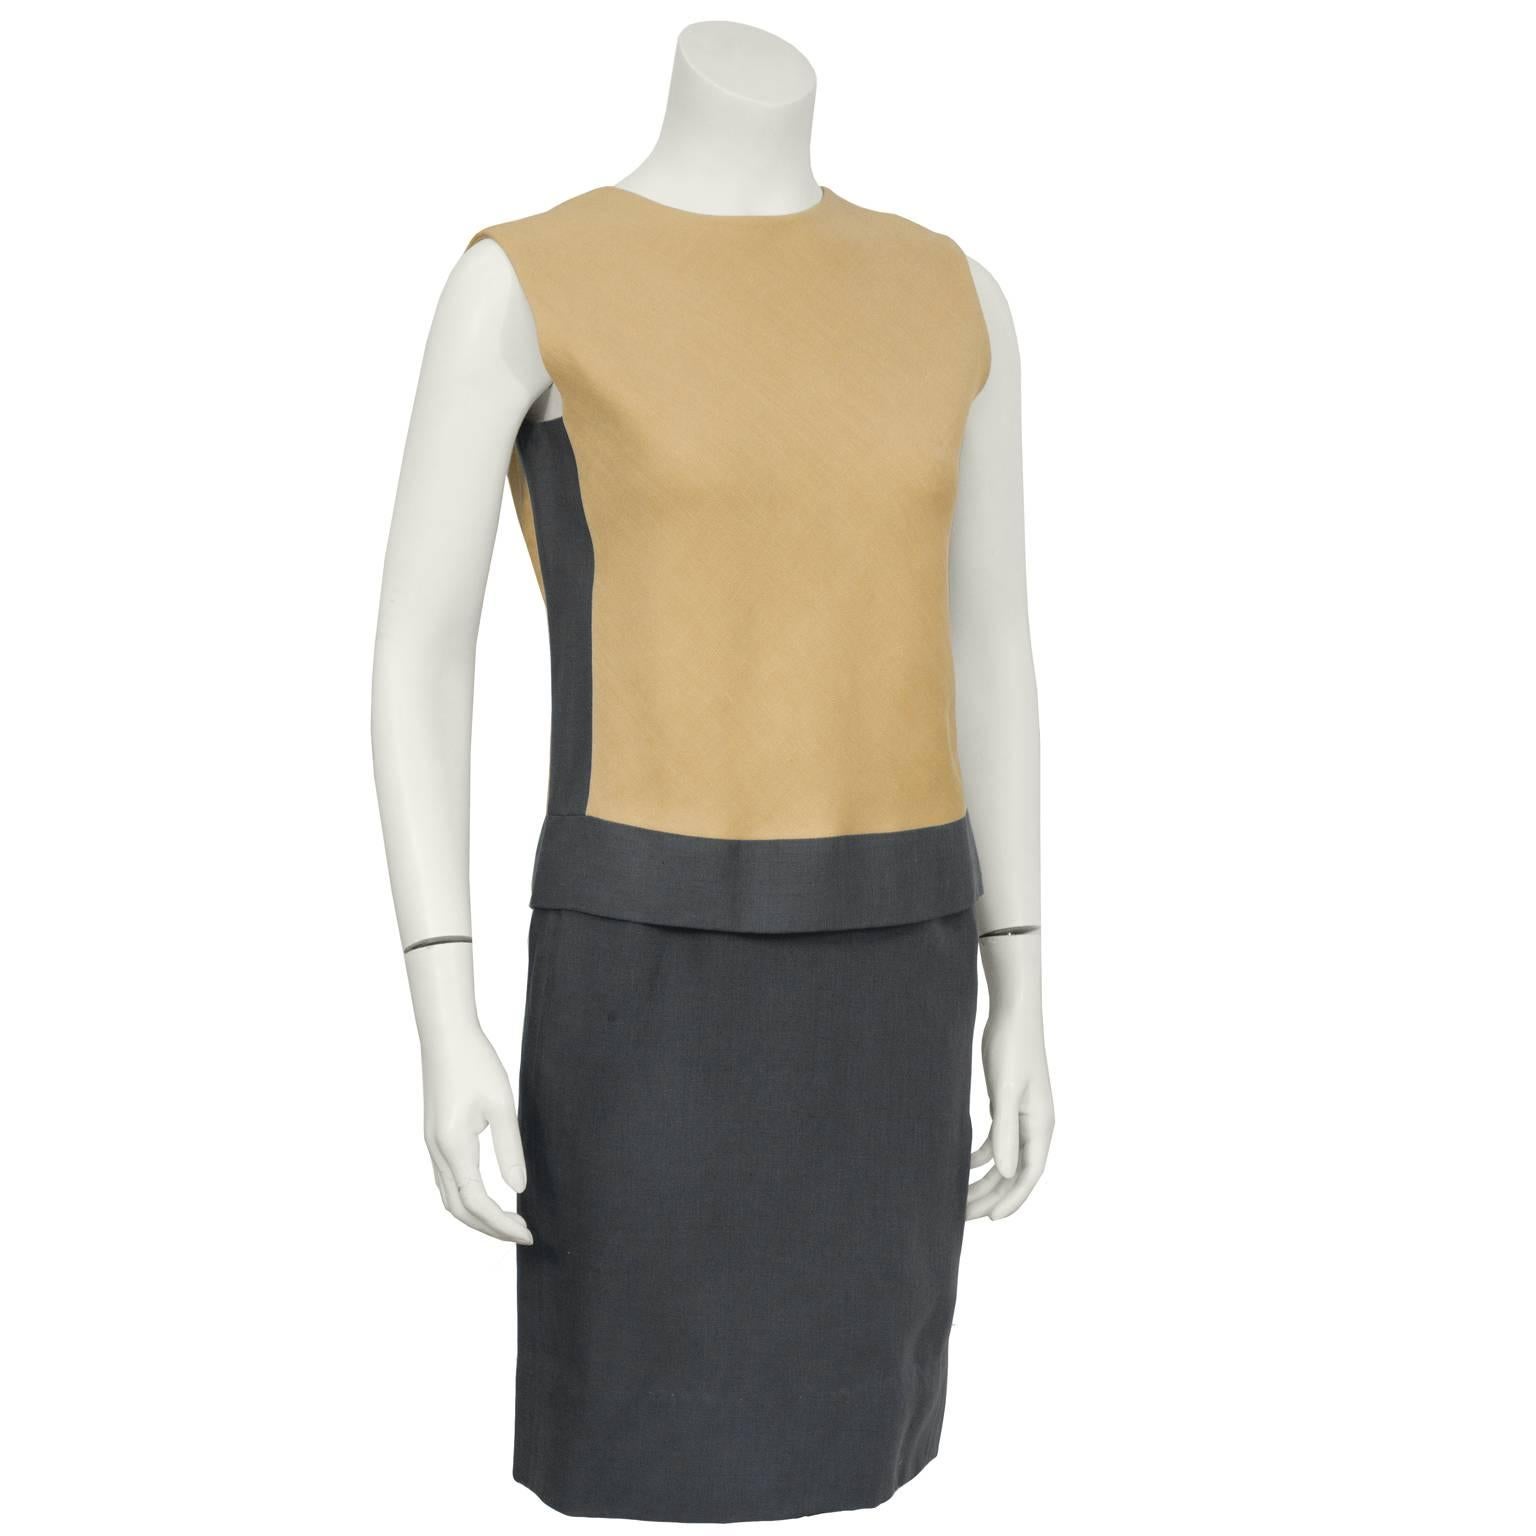 1960's chic sleeveless color block day dress in tan and grey linen with half linen, half rayon under dress. Teal Traina best known for his day and cocktail wear had a well established career in in the 60's and 70's. His minimalist and elegant pieces